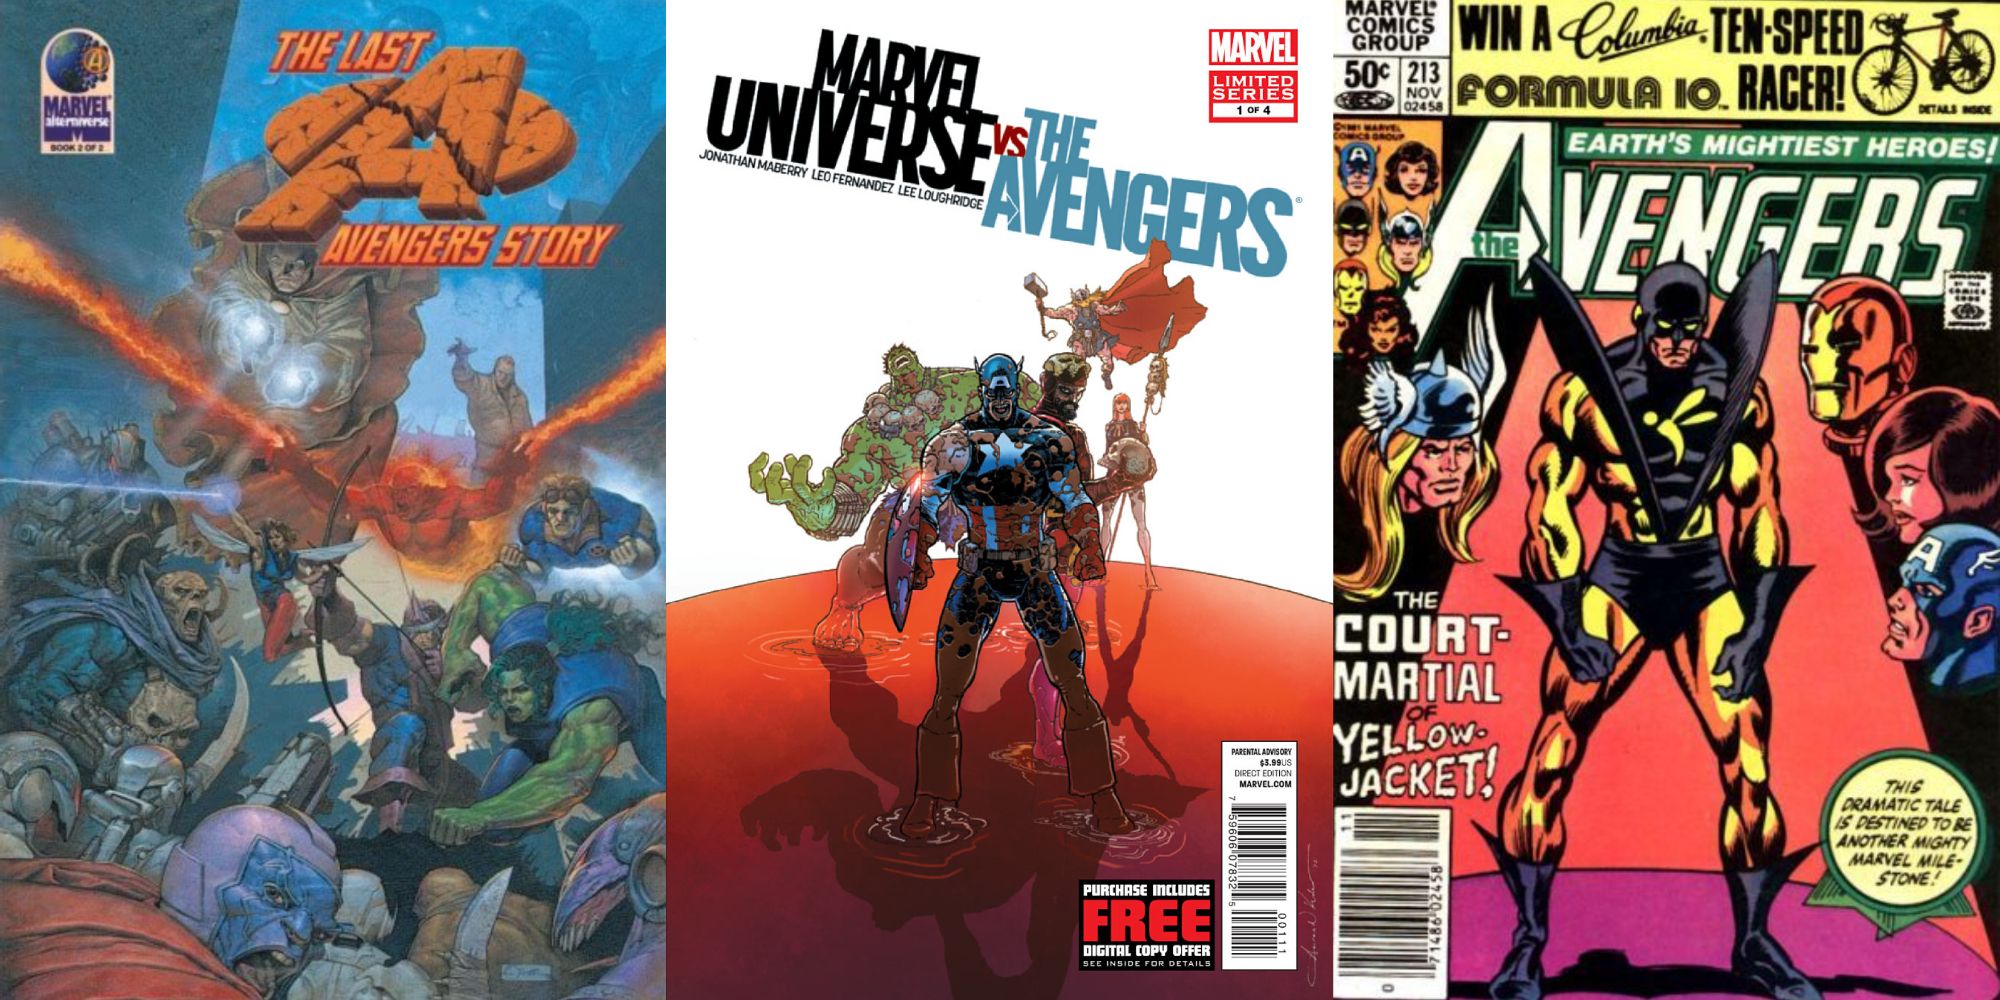 The cover to The Last Avengers Story #2, the cover to Marvel Universe Vs. The Avengers #1, and the cover to Avengers #213